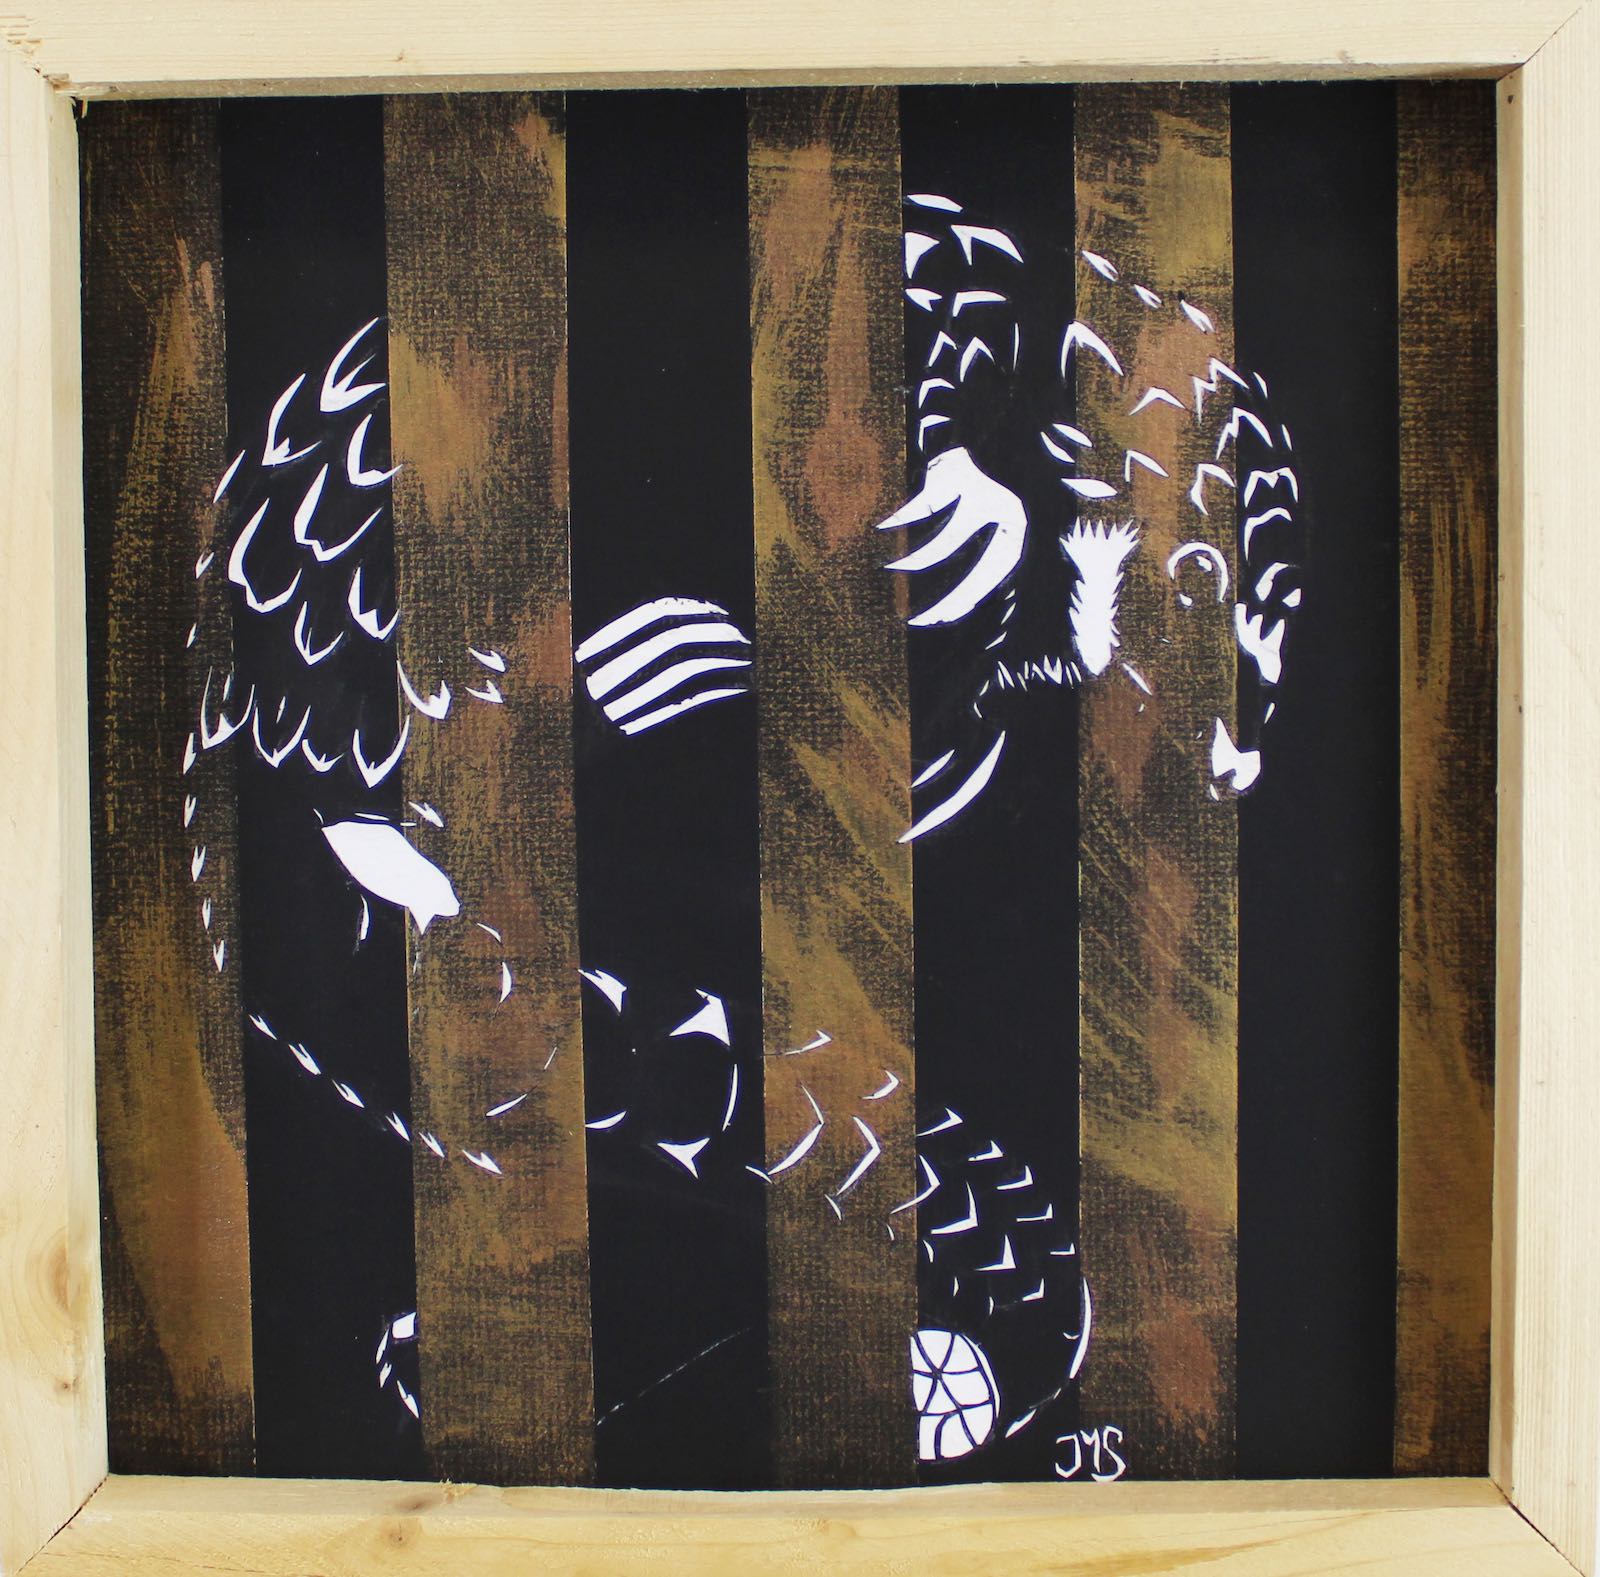 Artwork of a pangolin trapped behind wooden bars.